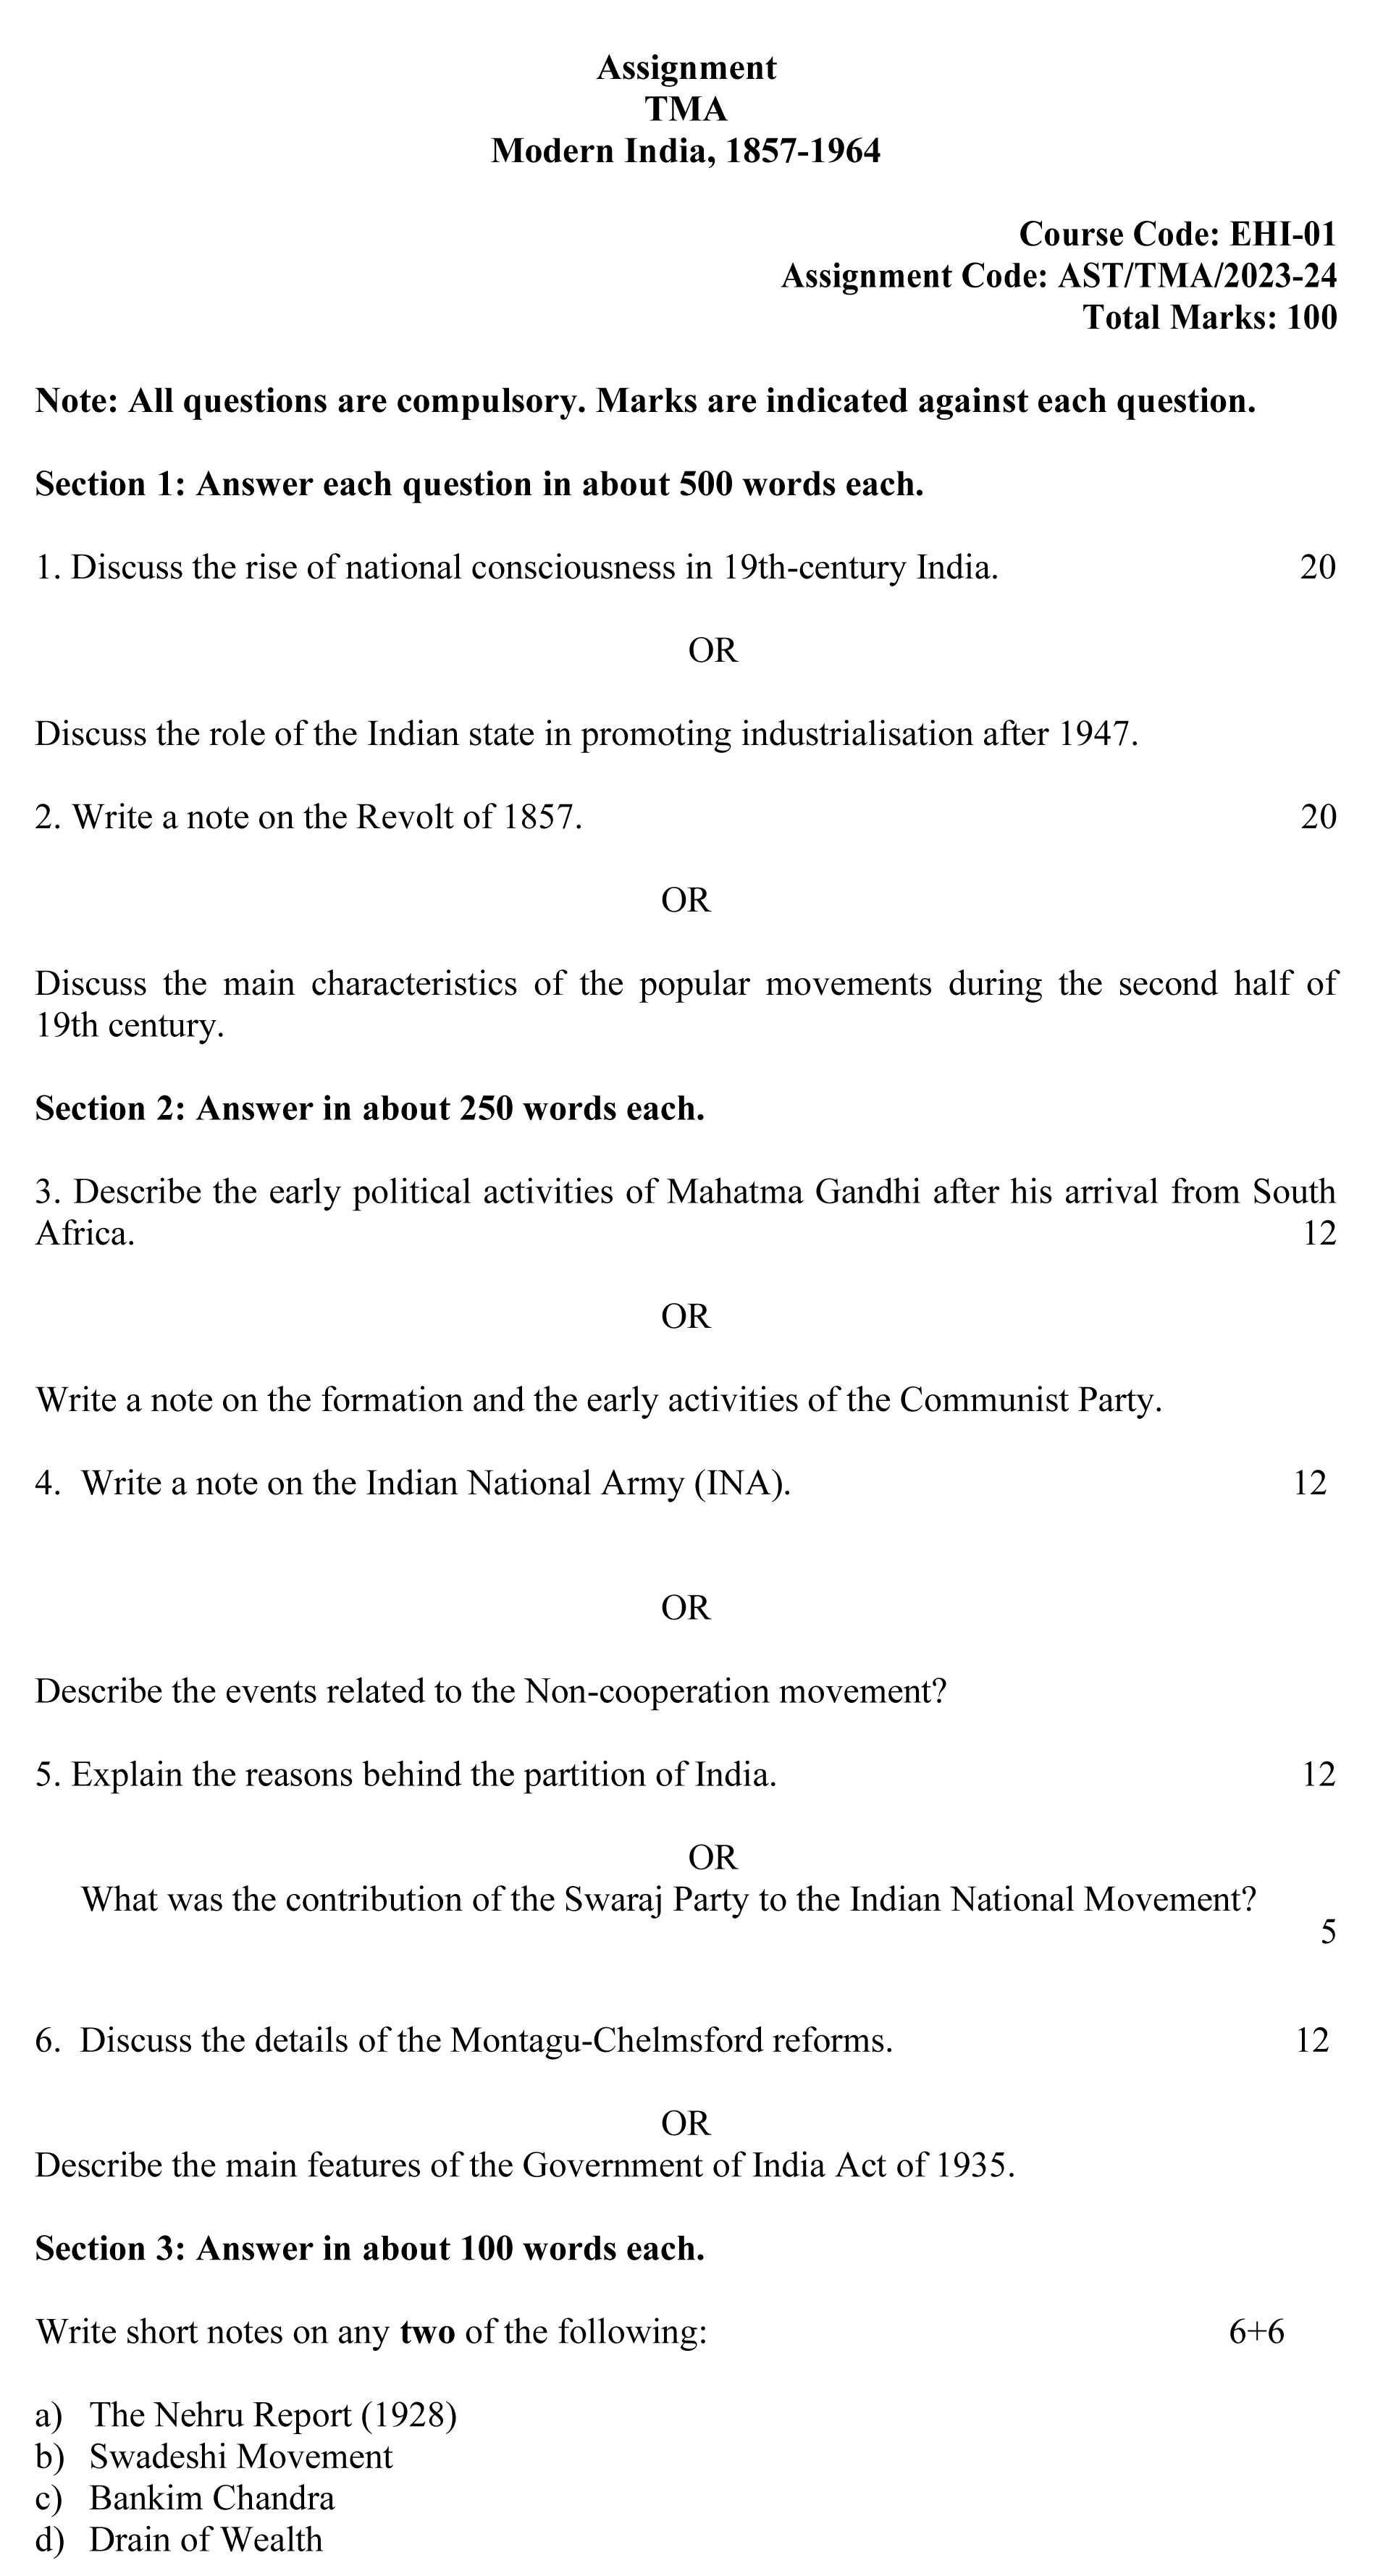 IGNOU EHI-01 - Modern India 1857-1964 Latest Solved Assignment-July 2023 - January 2024